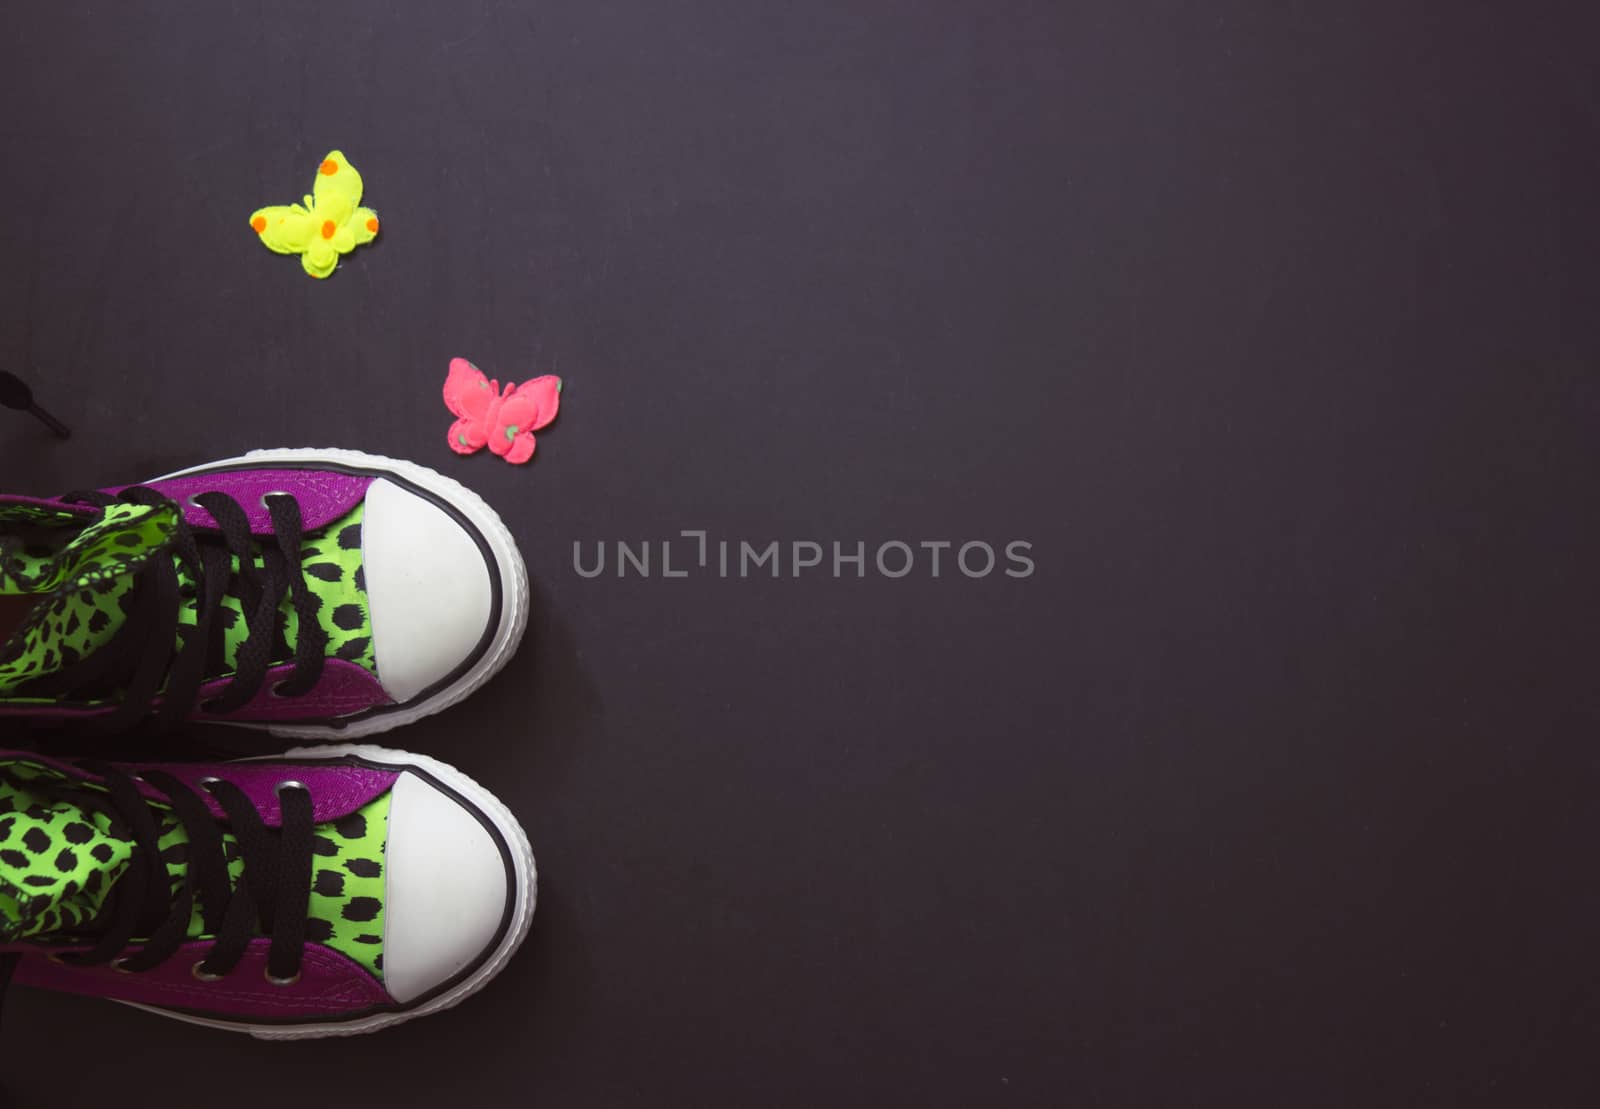 Violet sneakers with leopard print, on black board, vintage filter; copy space